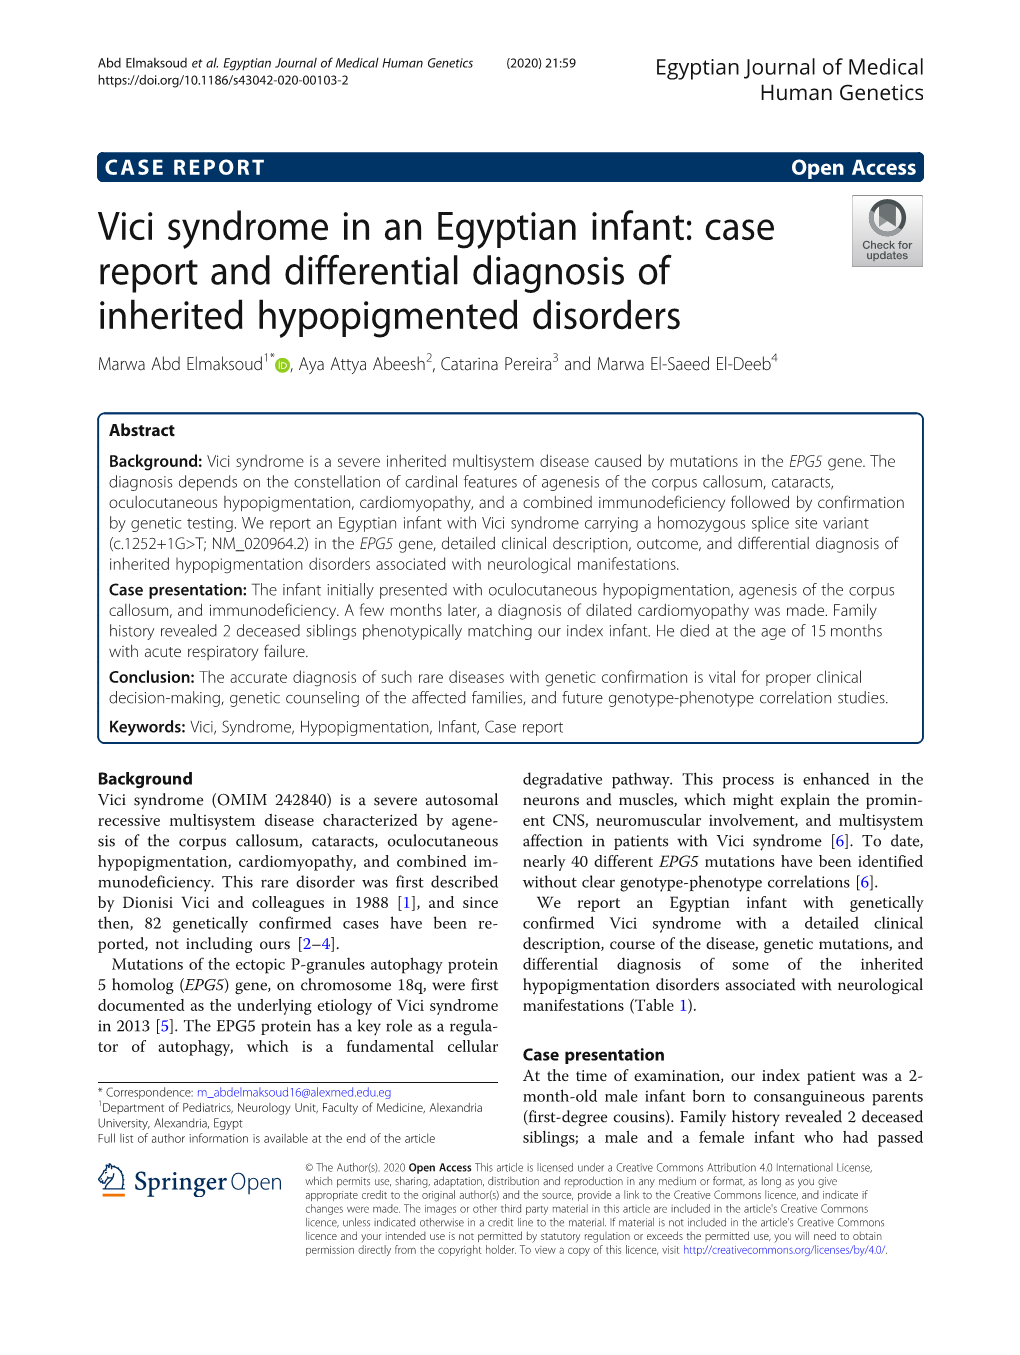 Vici Syndrome in an Egyptian Infant: Case Report and Differential